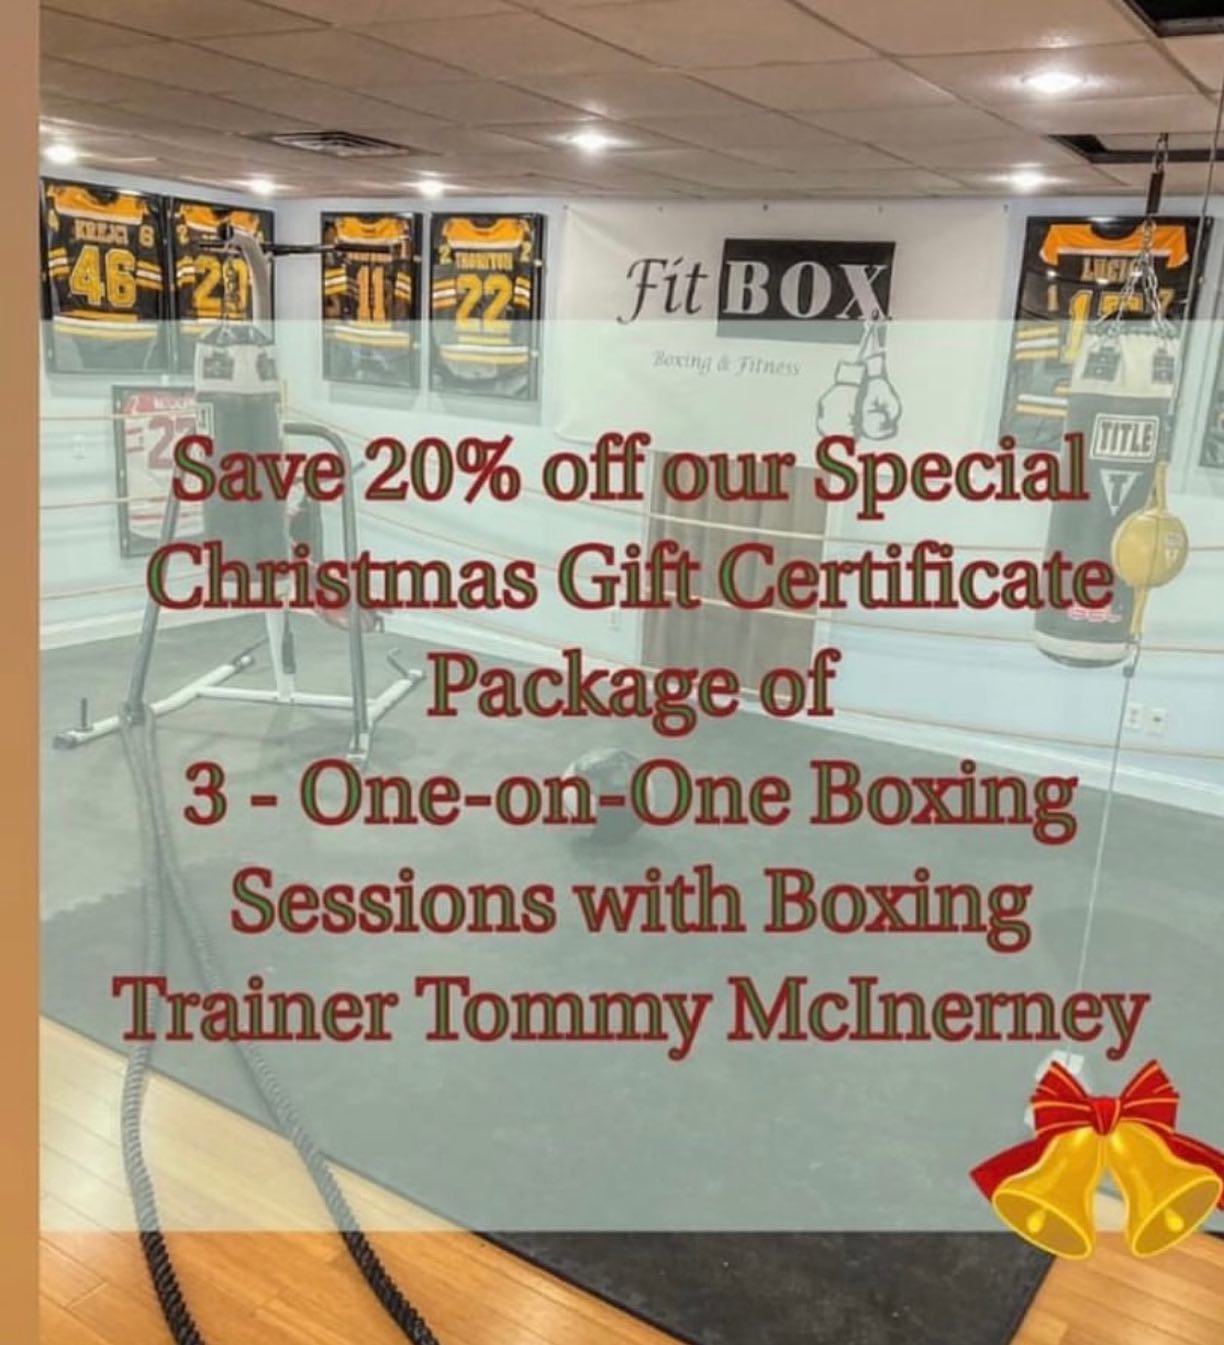 Christmas is here and we have the perfect gift . Contact us Today for more info call/text (781)727-9503 or email fitbox@outlook.com